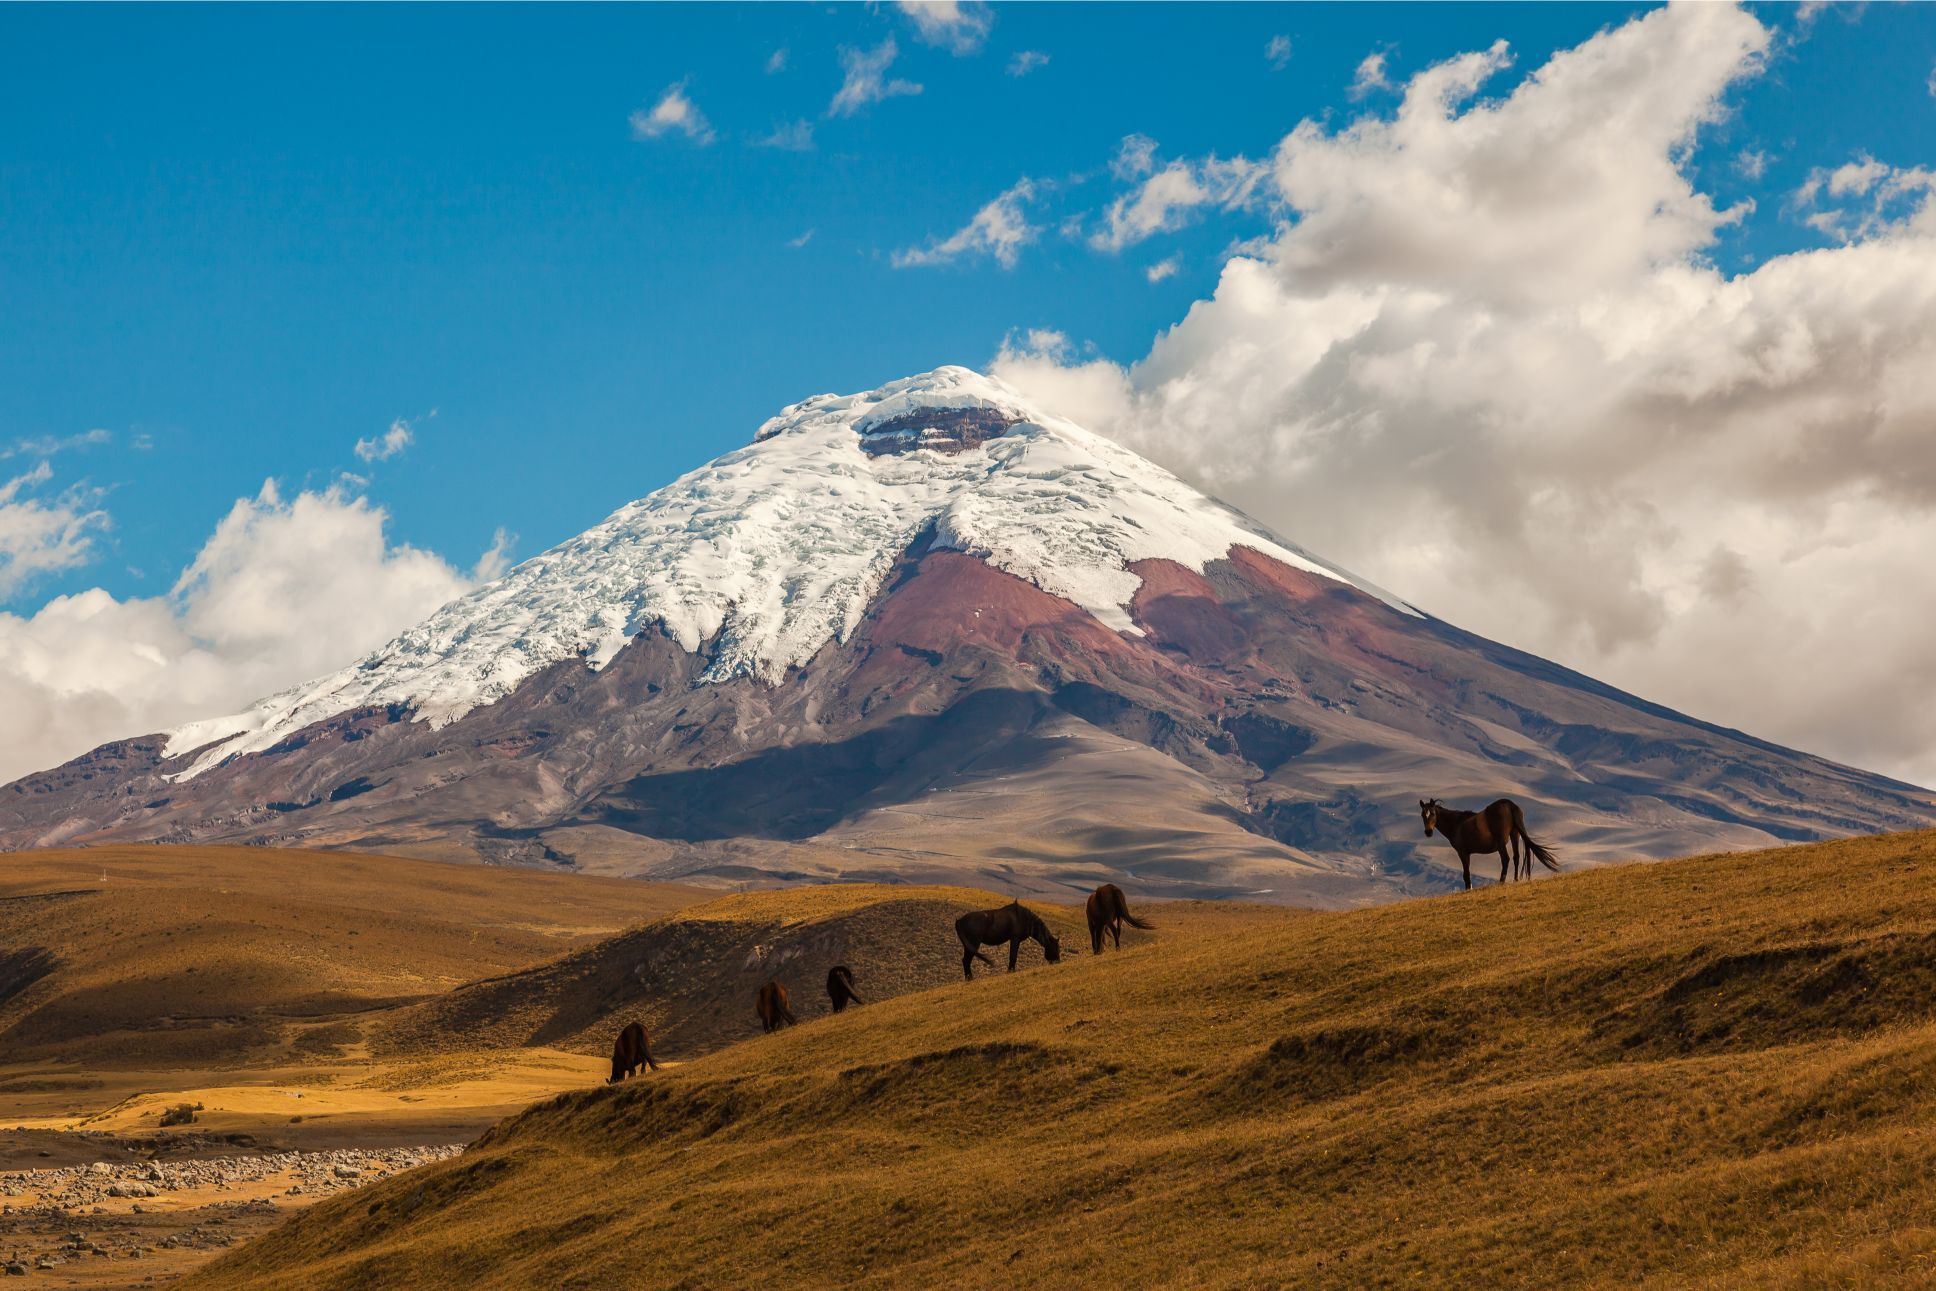 Snowcapped Cotopaxi Volcano looms over the landscape in Ecuador. Photo: Getty.